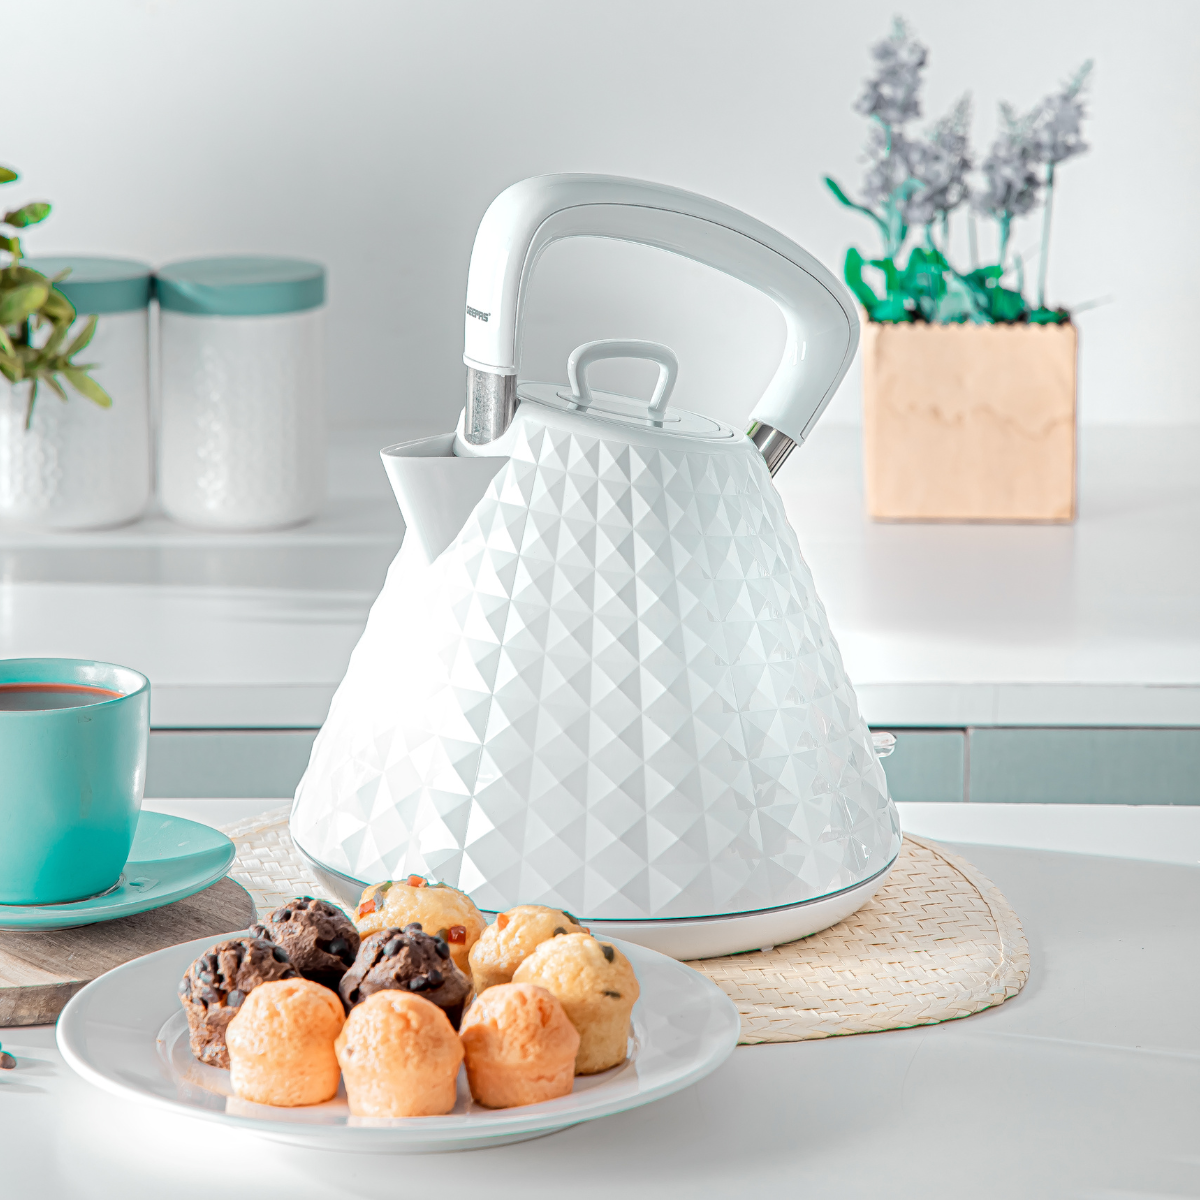 Glass kettle and toaster from Morphy Richards 